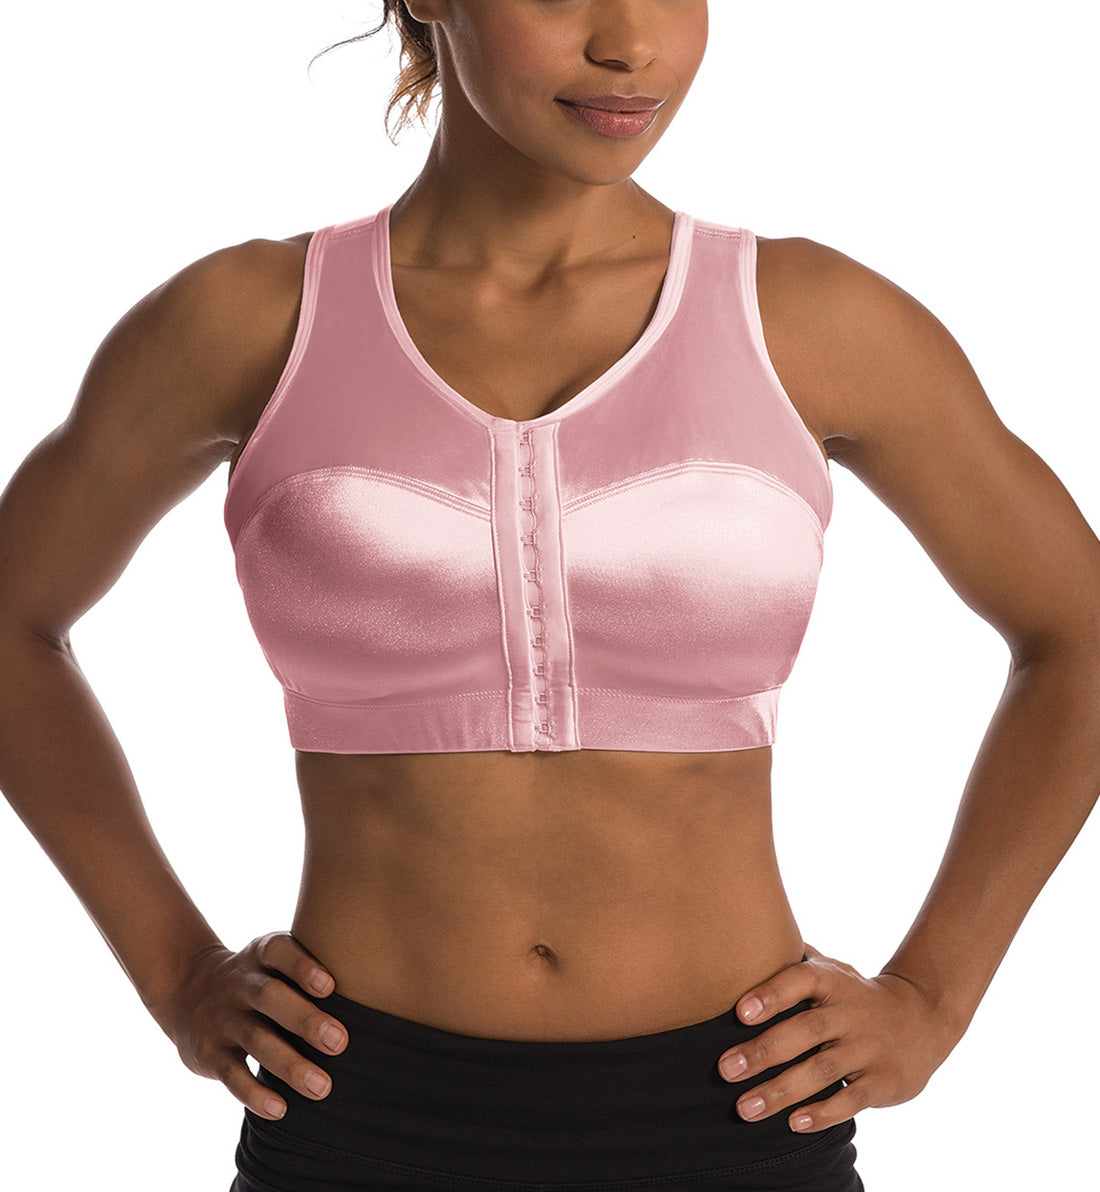 Enell High Impact Sports Bra (100),00,Hope Pink - Hope Pink,00